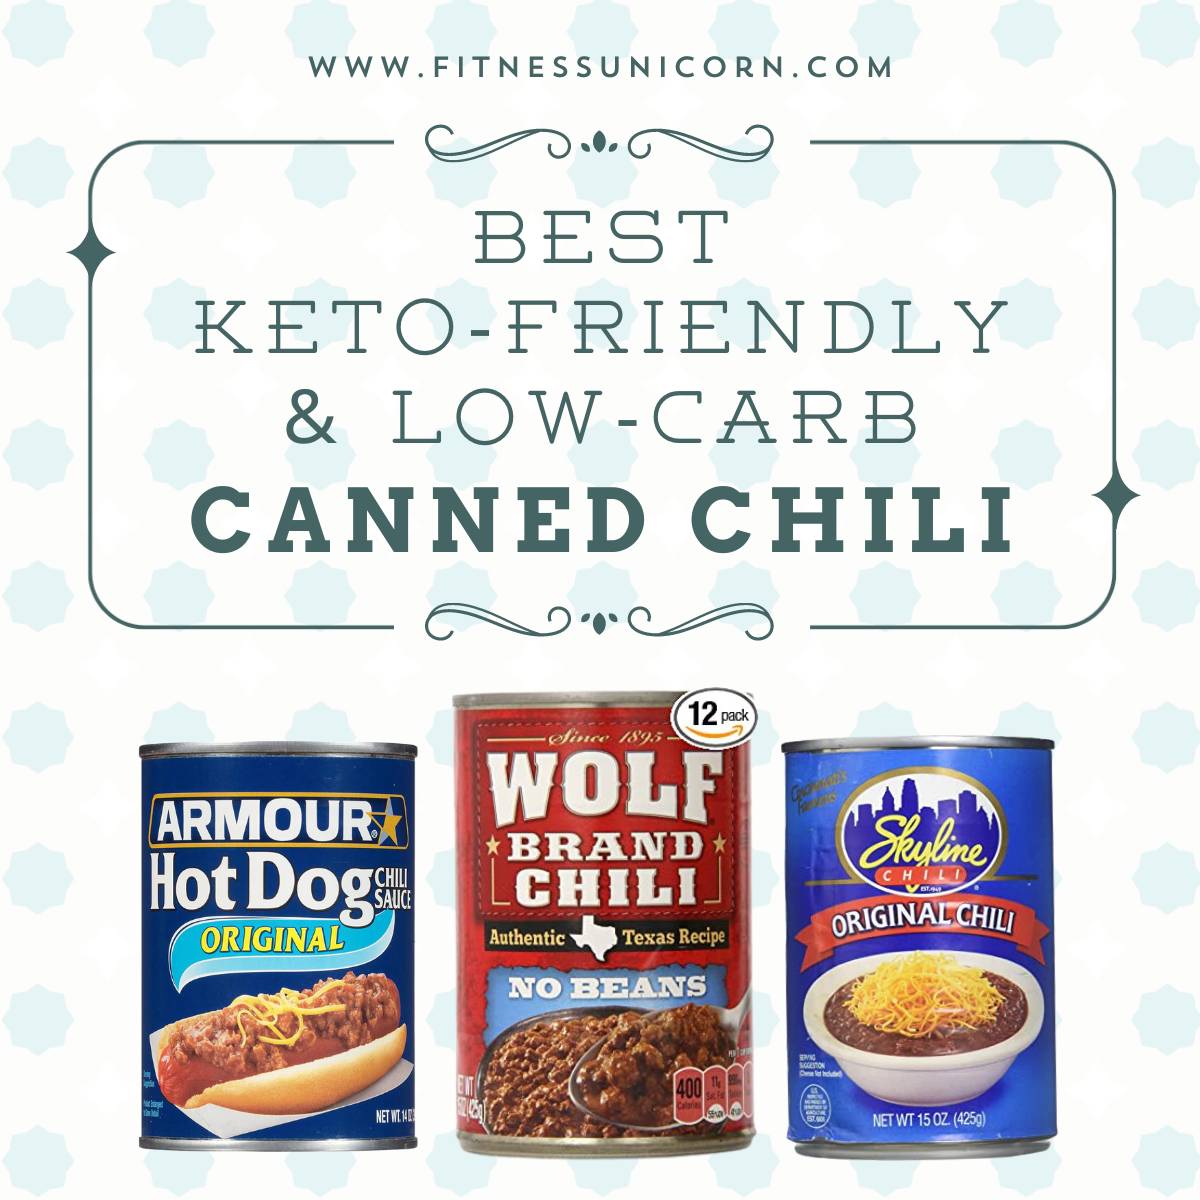 BEST Keto & Low-Carb Canned Chili